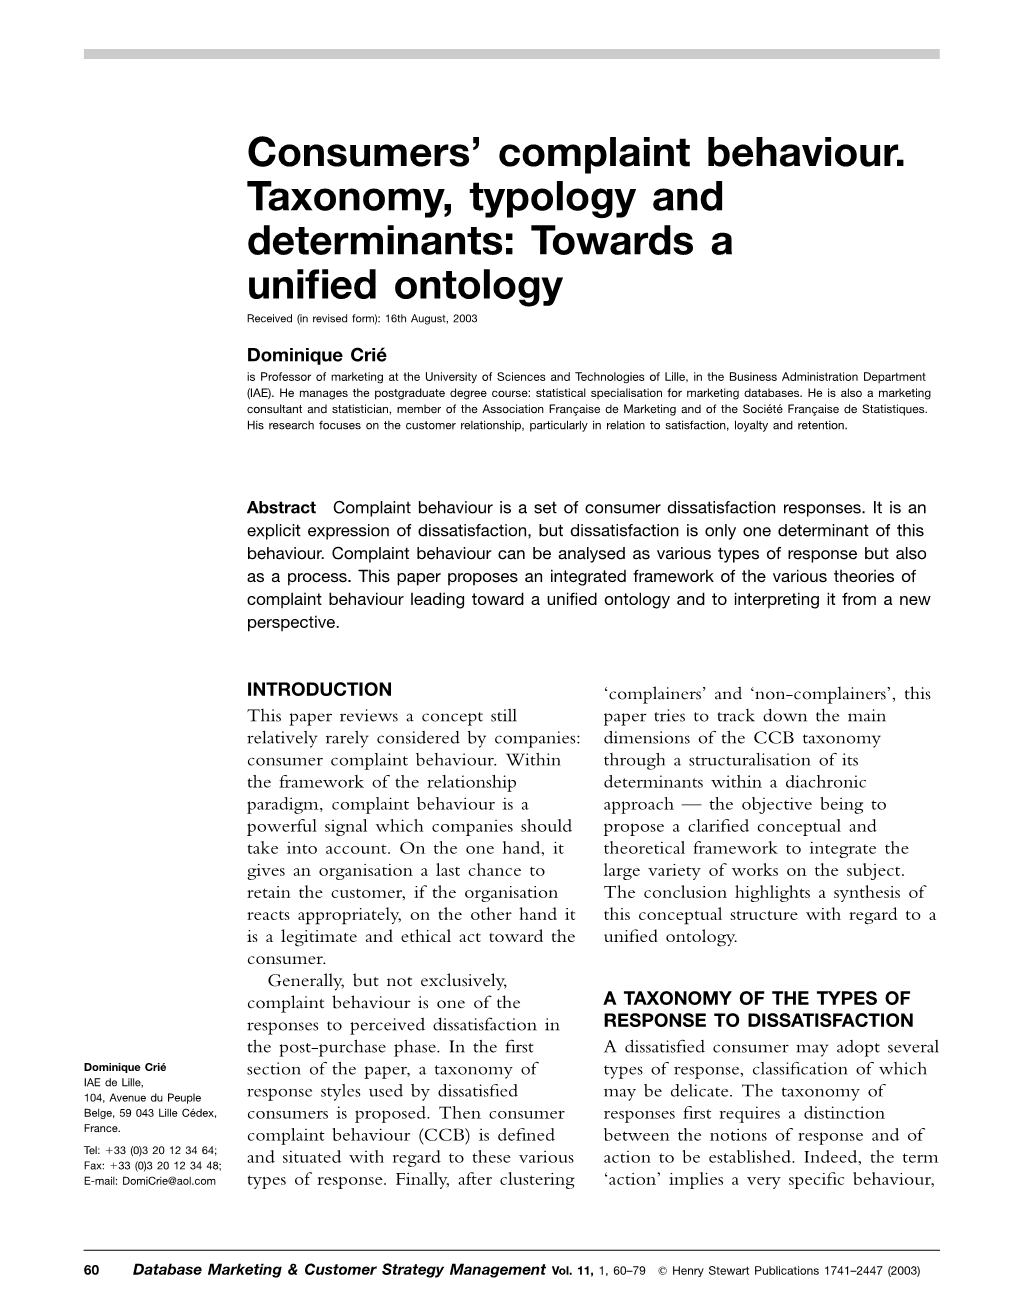 Consumers' Complaint Behaviour. Taxonomy, Typology and Determinants